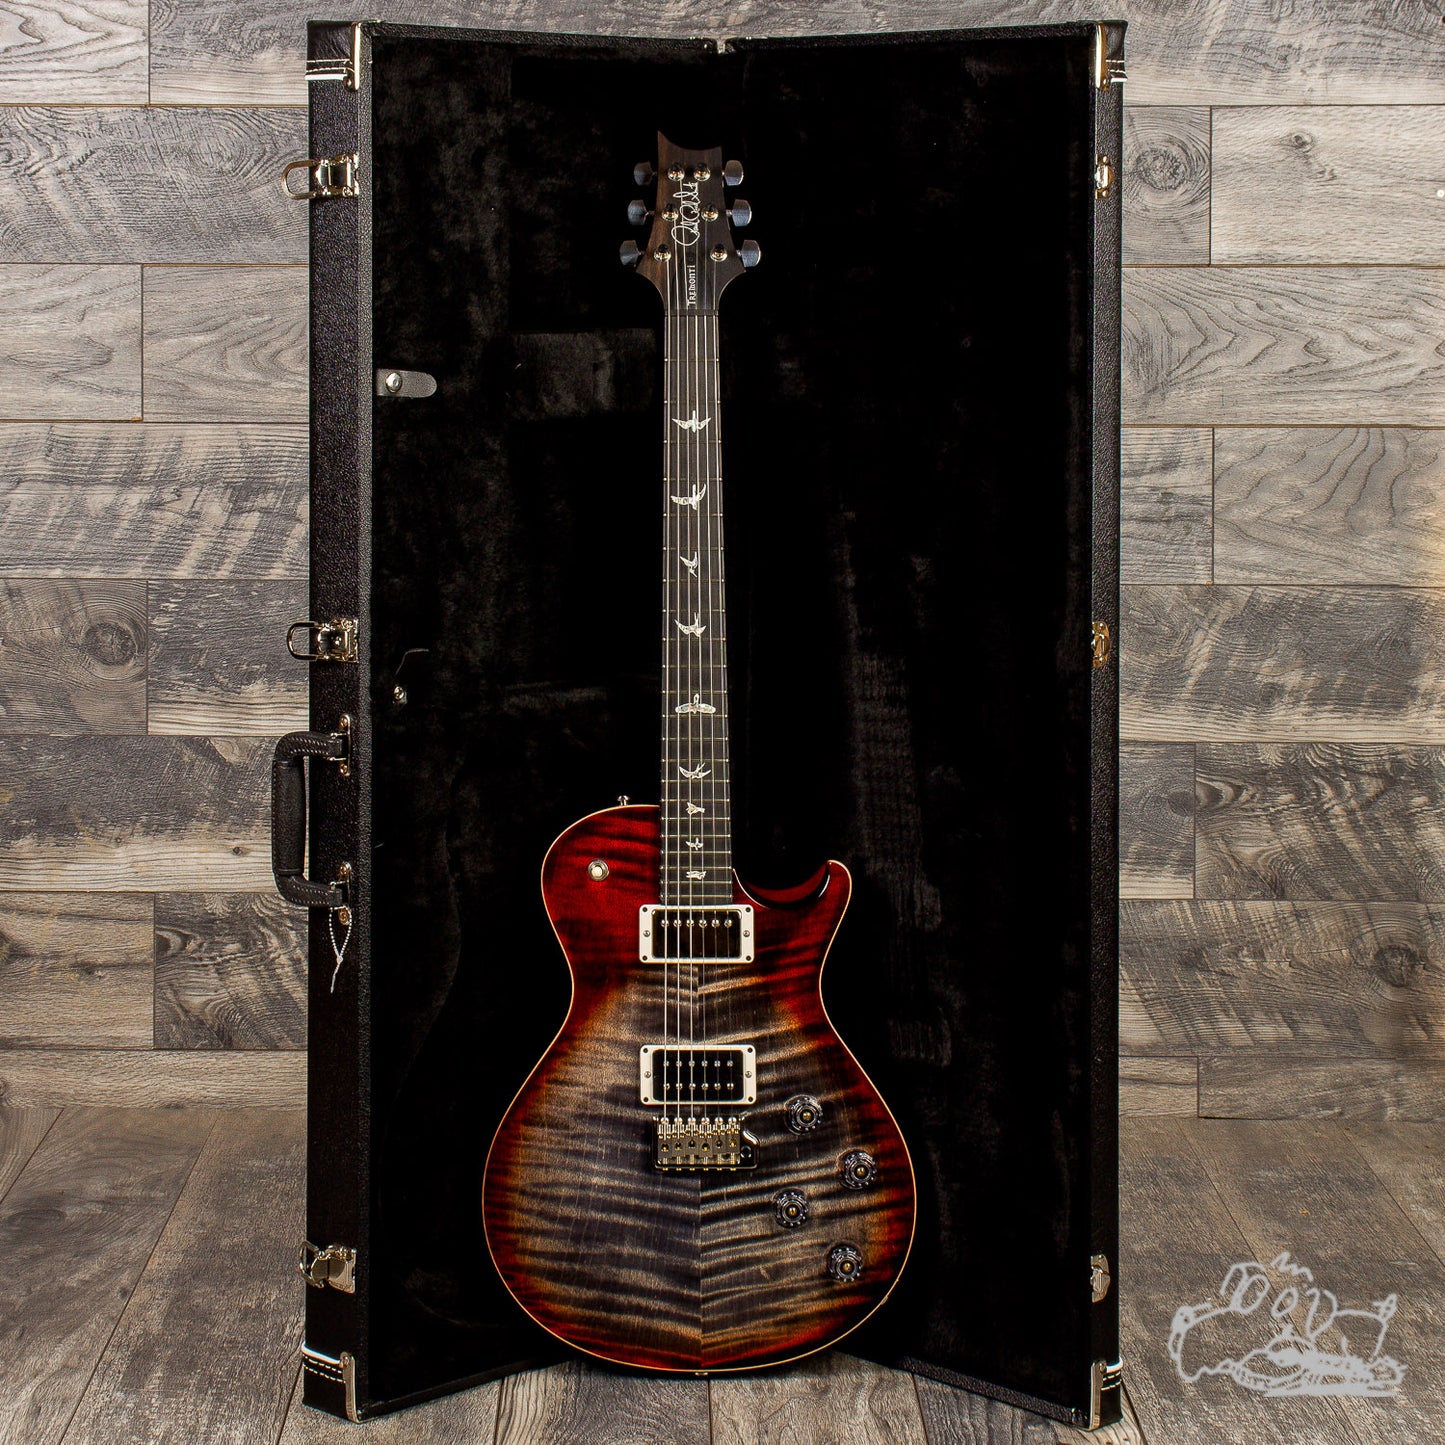 2019 PRS Tremonti - Cherry Charcoal Burst - Make us an offer!